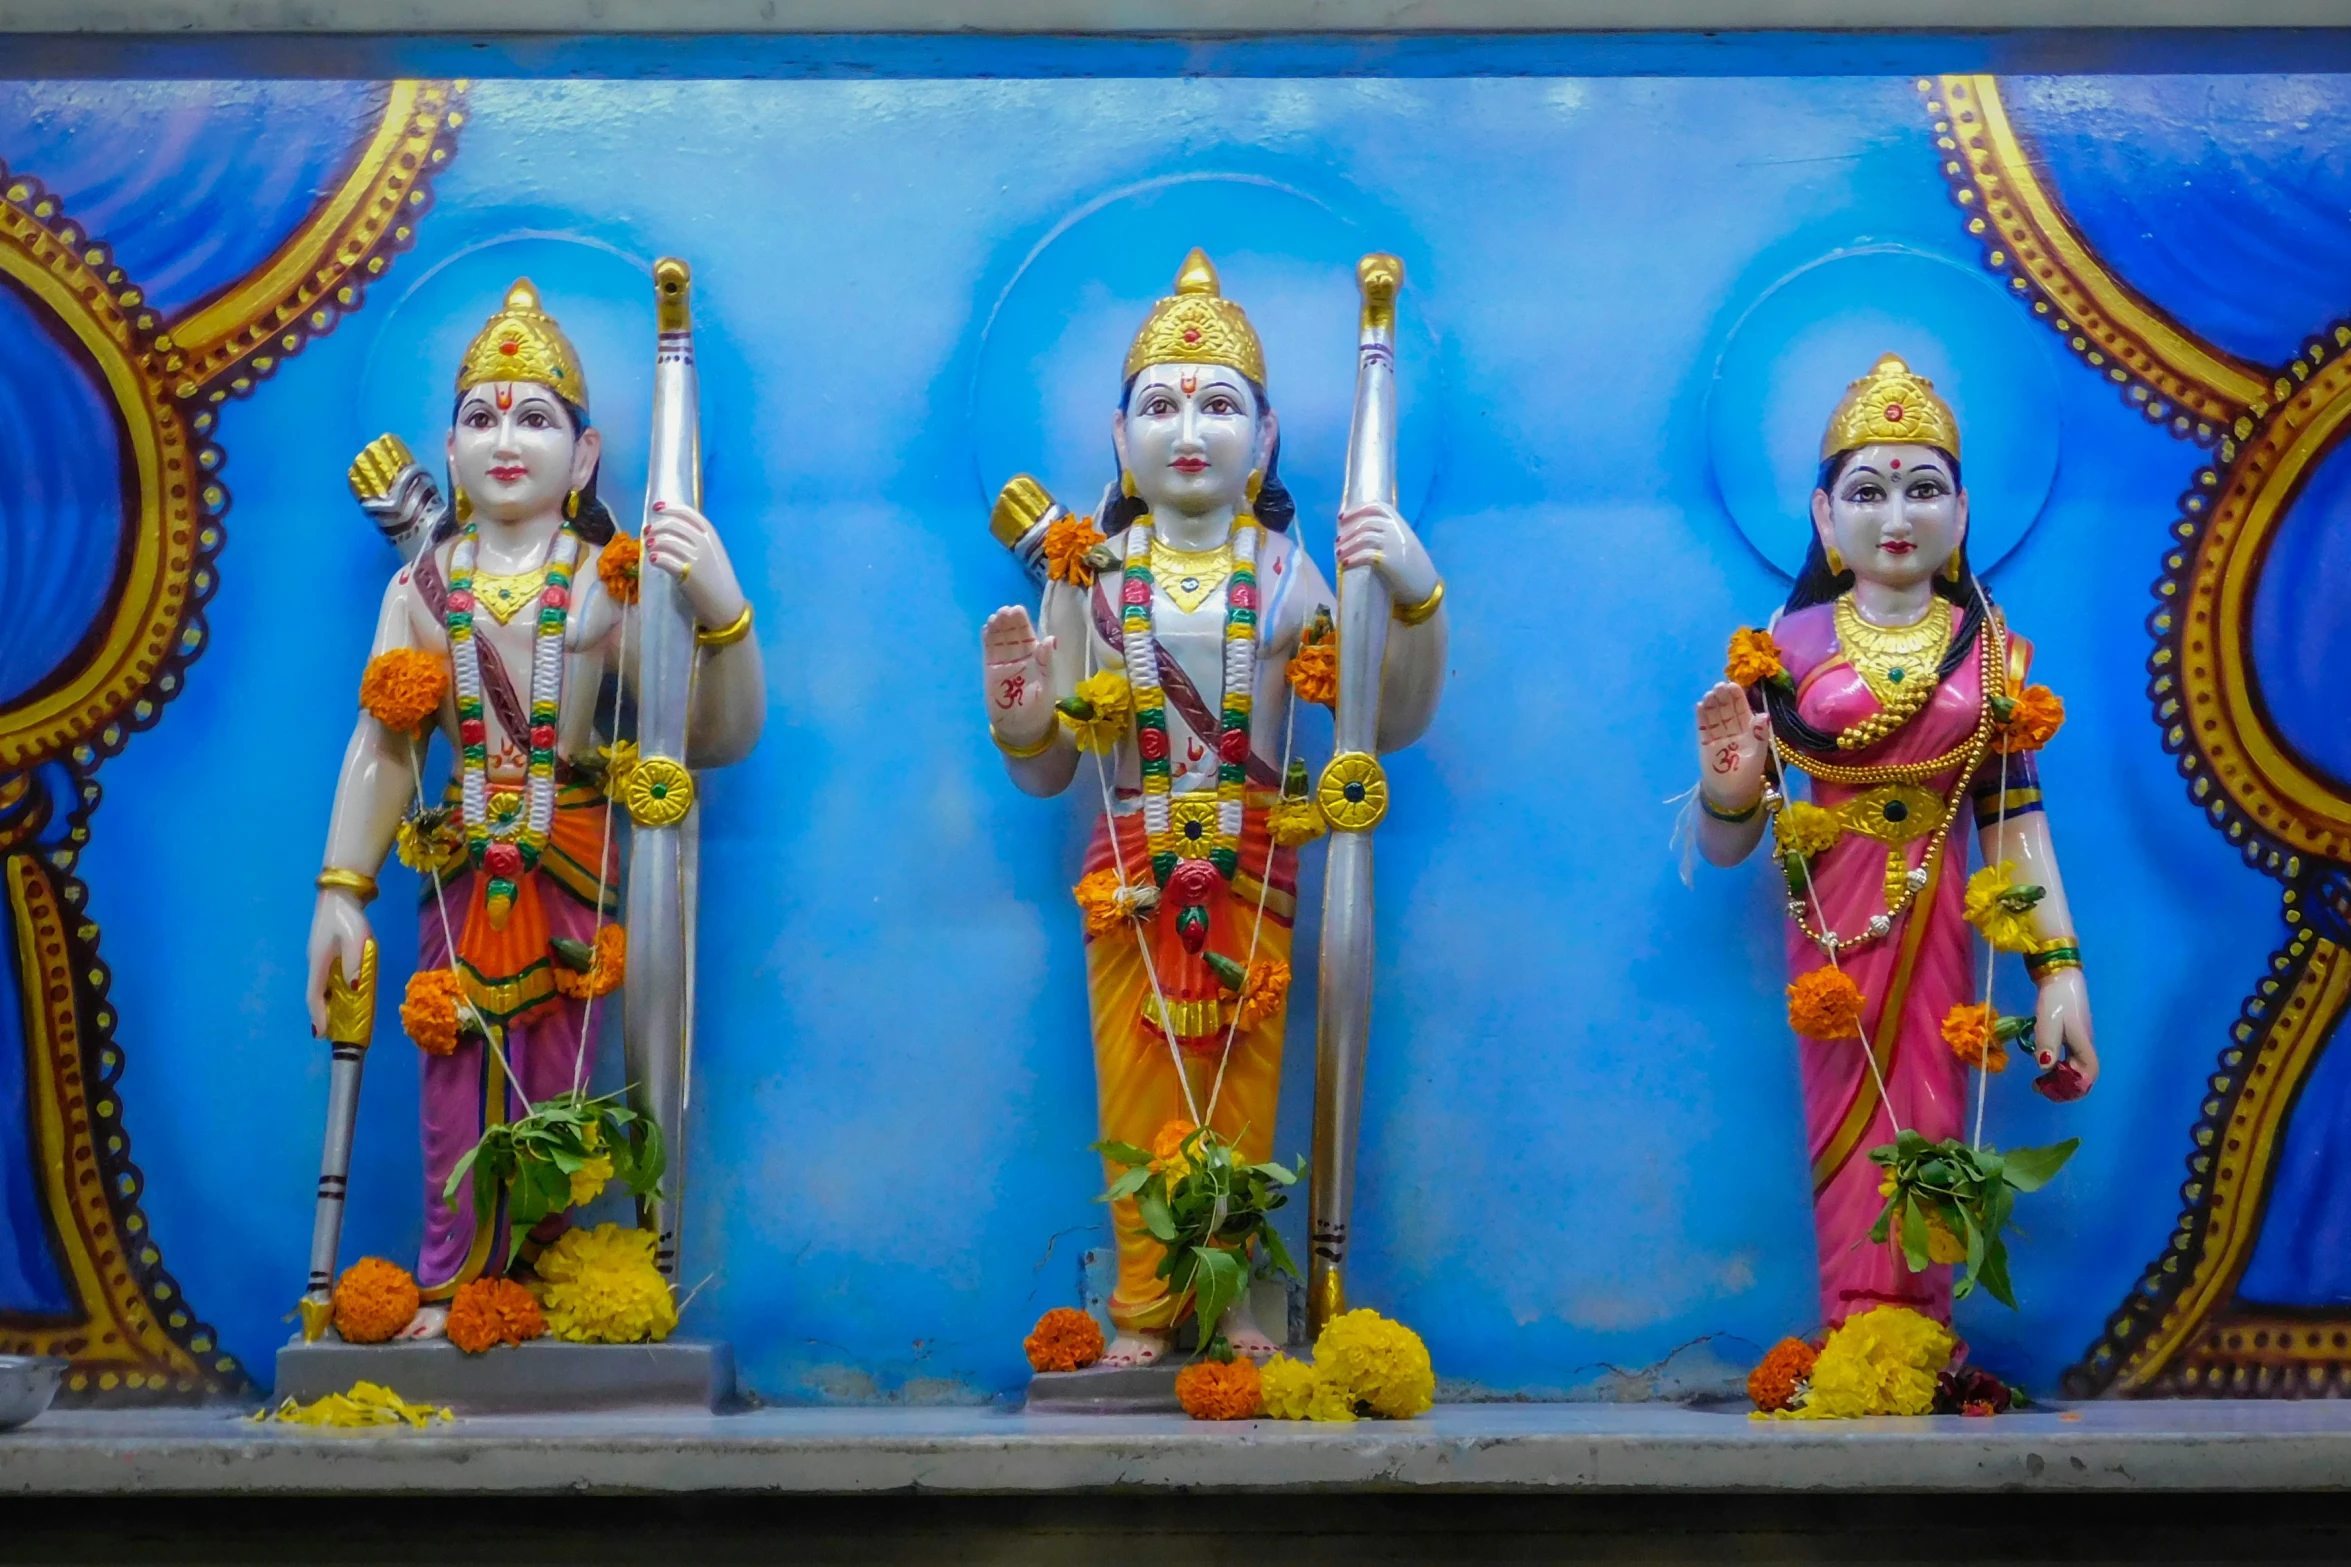 three statues of gods dressed in yellow and orange